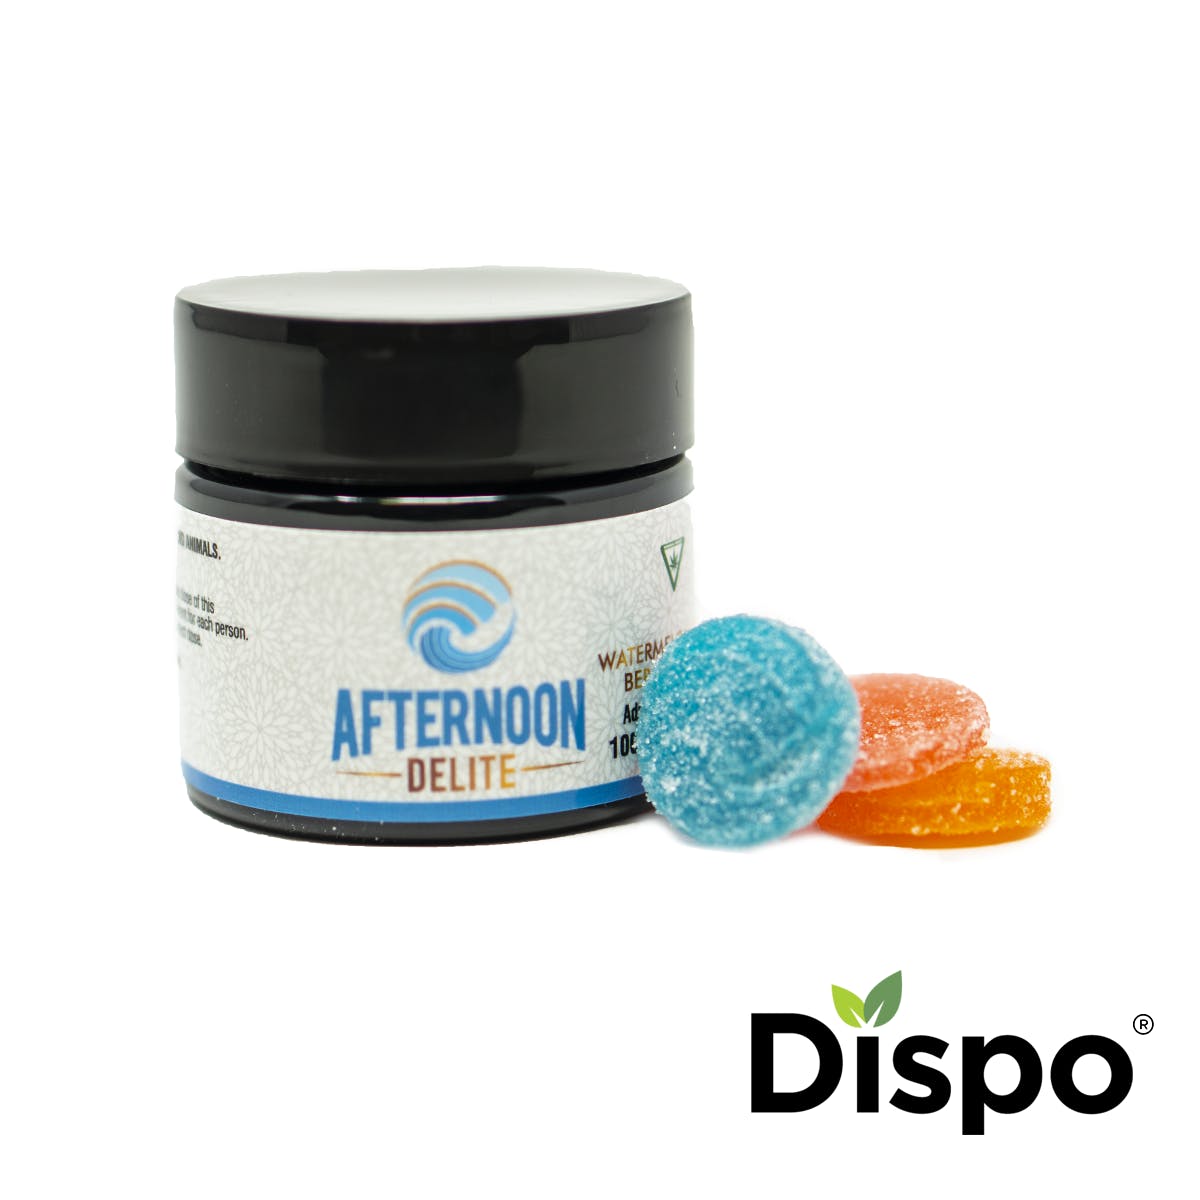 edible-afternoon-delite-100mg-gummy